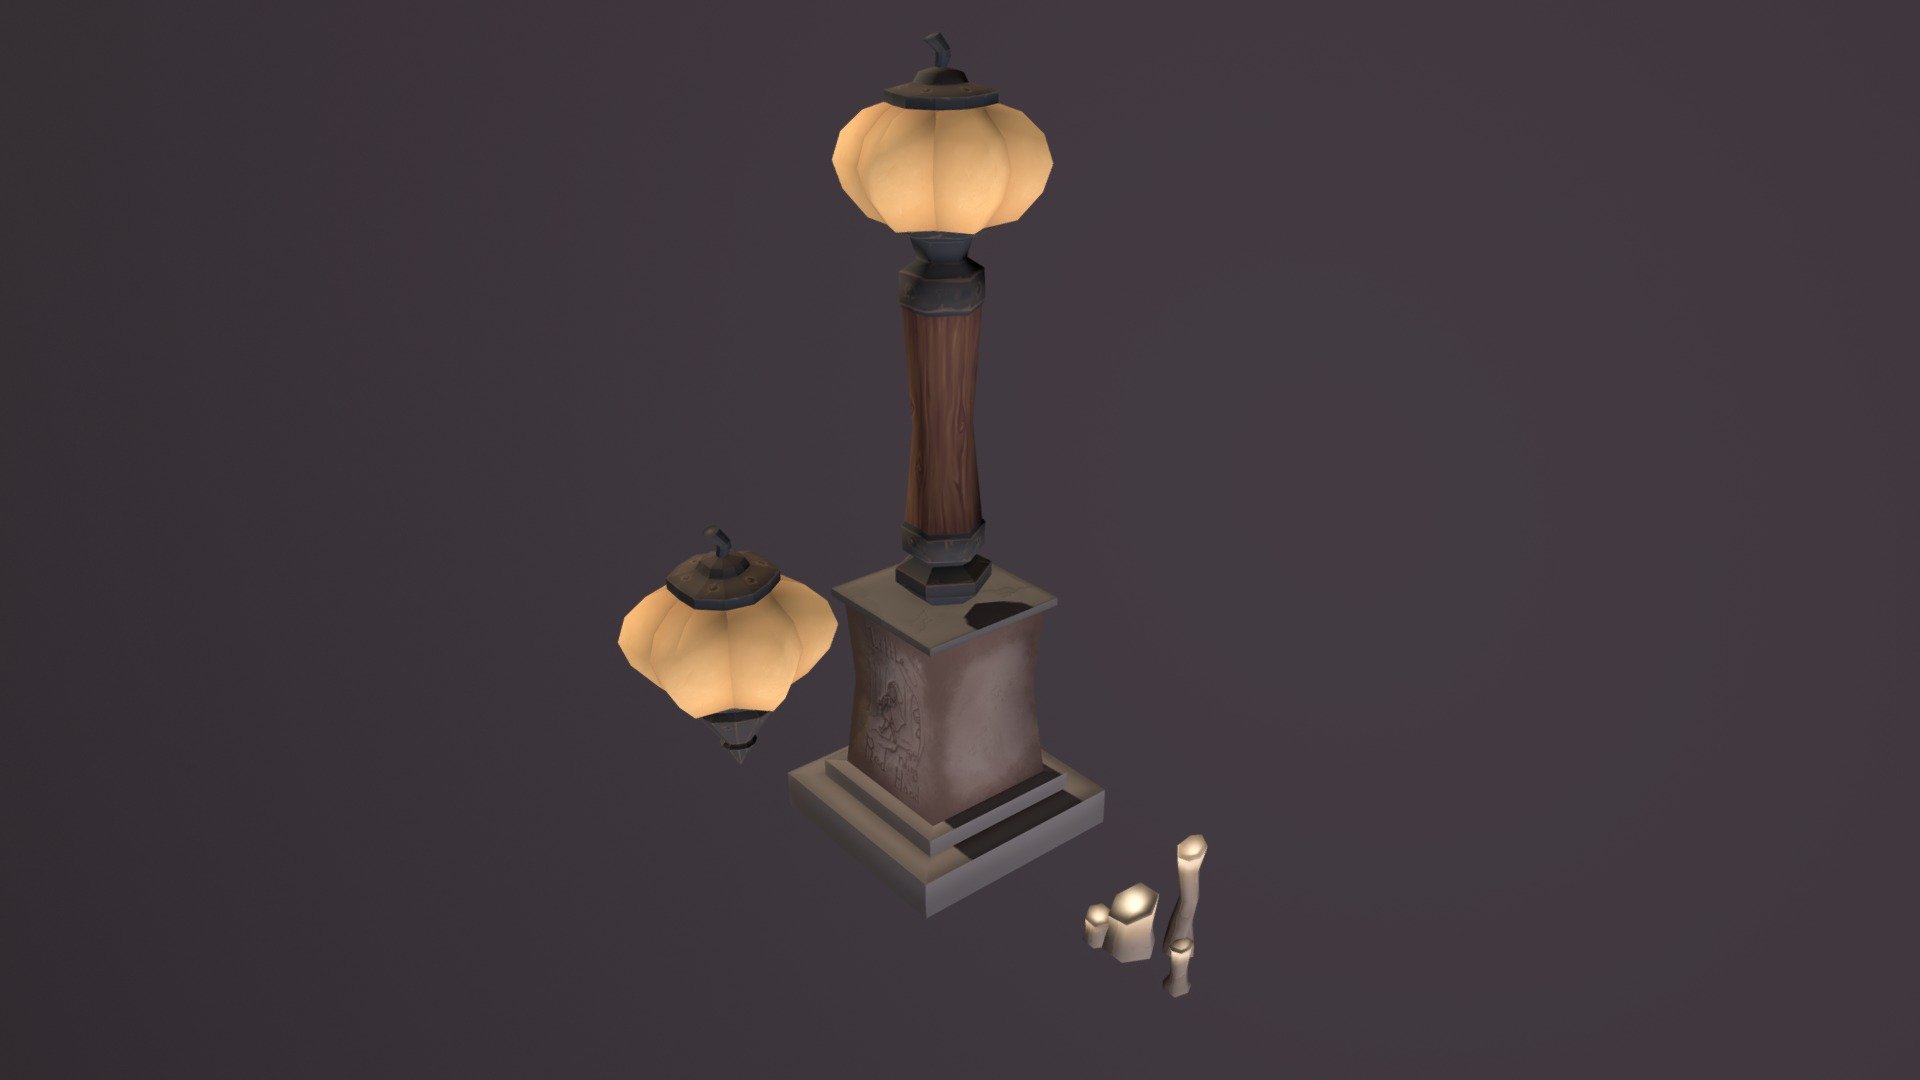 Some assets I made for a uni project, themed on a harvest festival 3d model